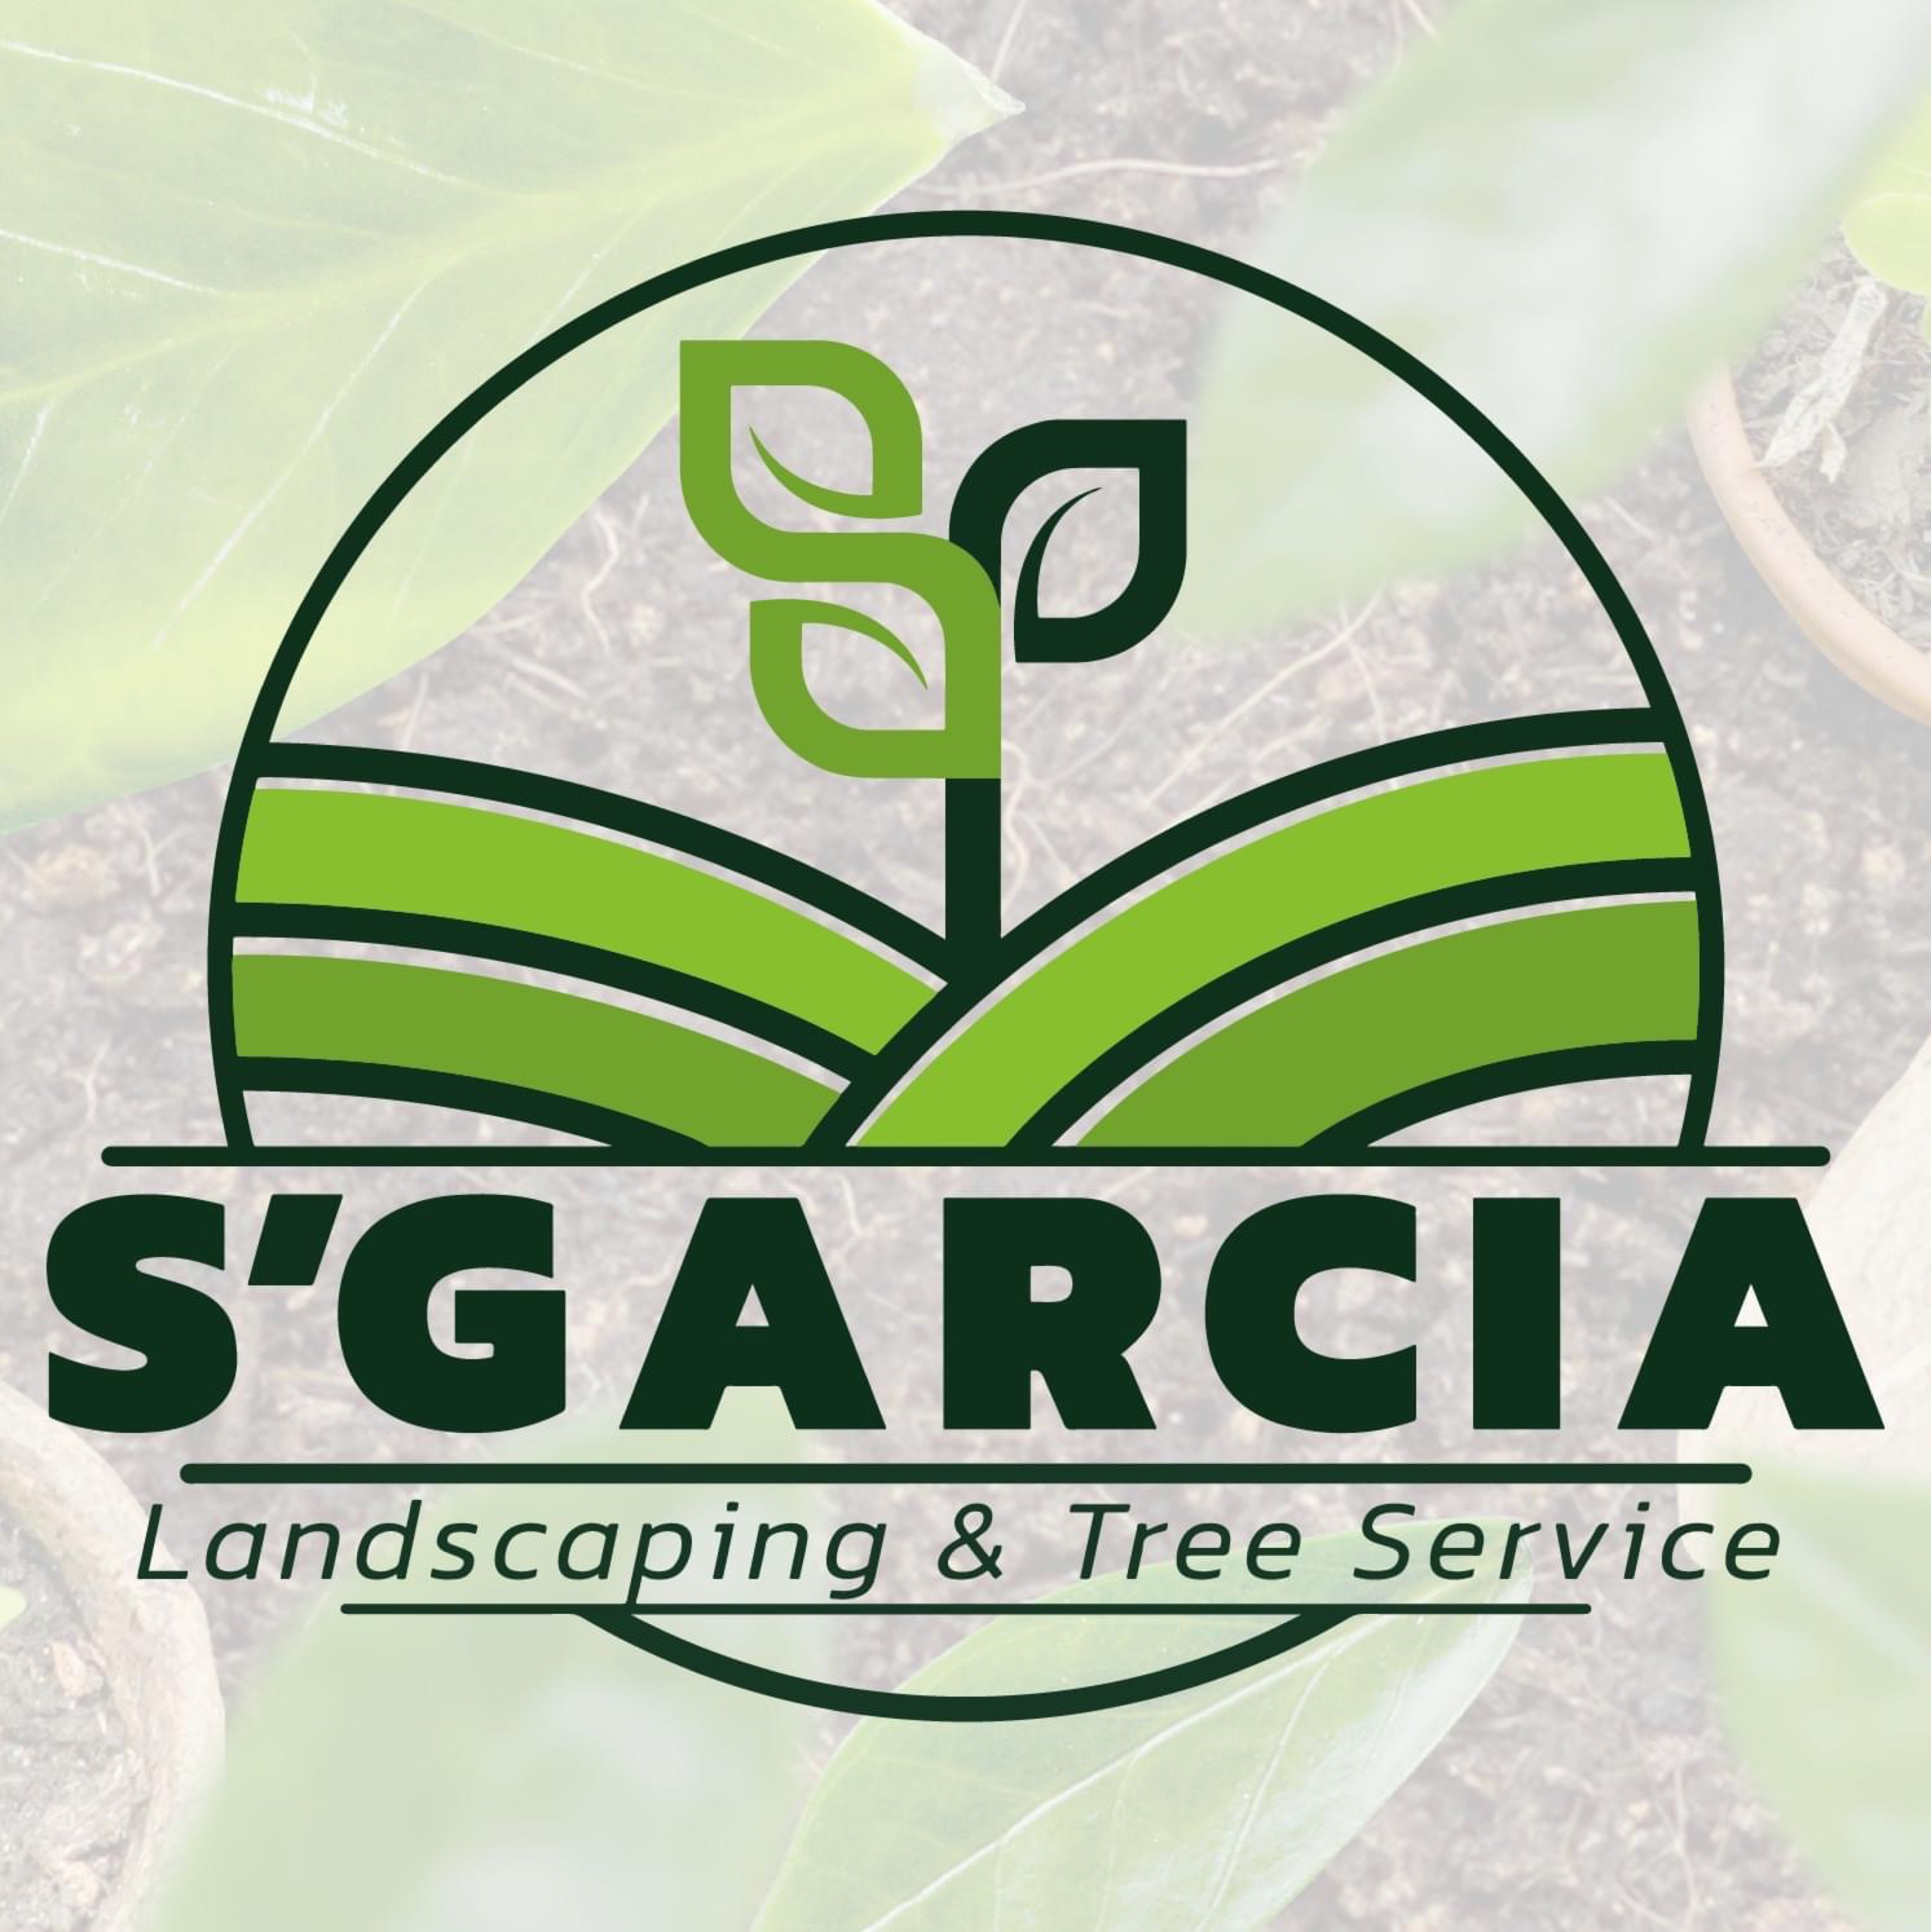 S'Garcia Landscaping & Tree Services Logo